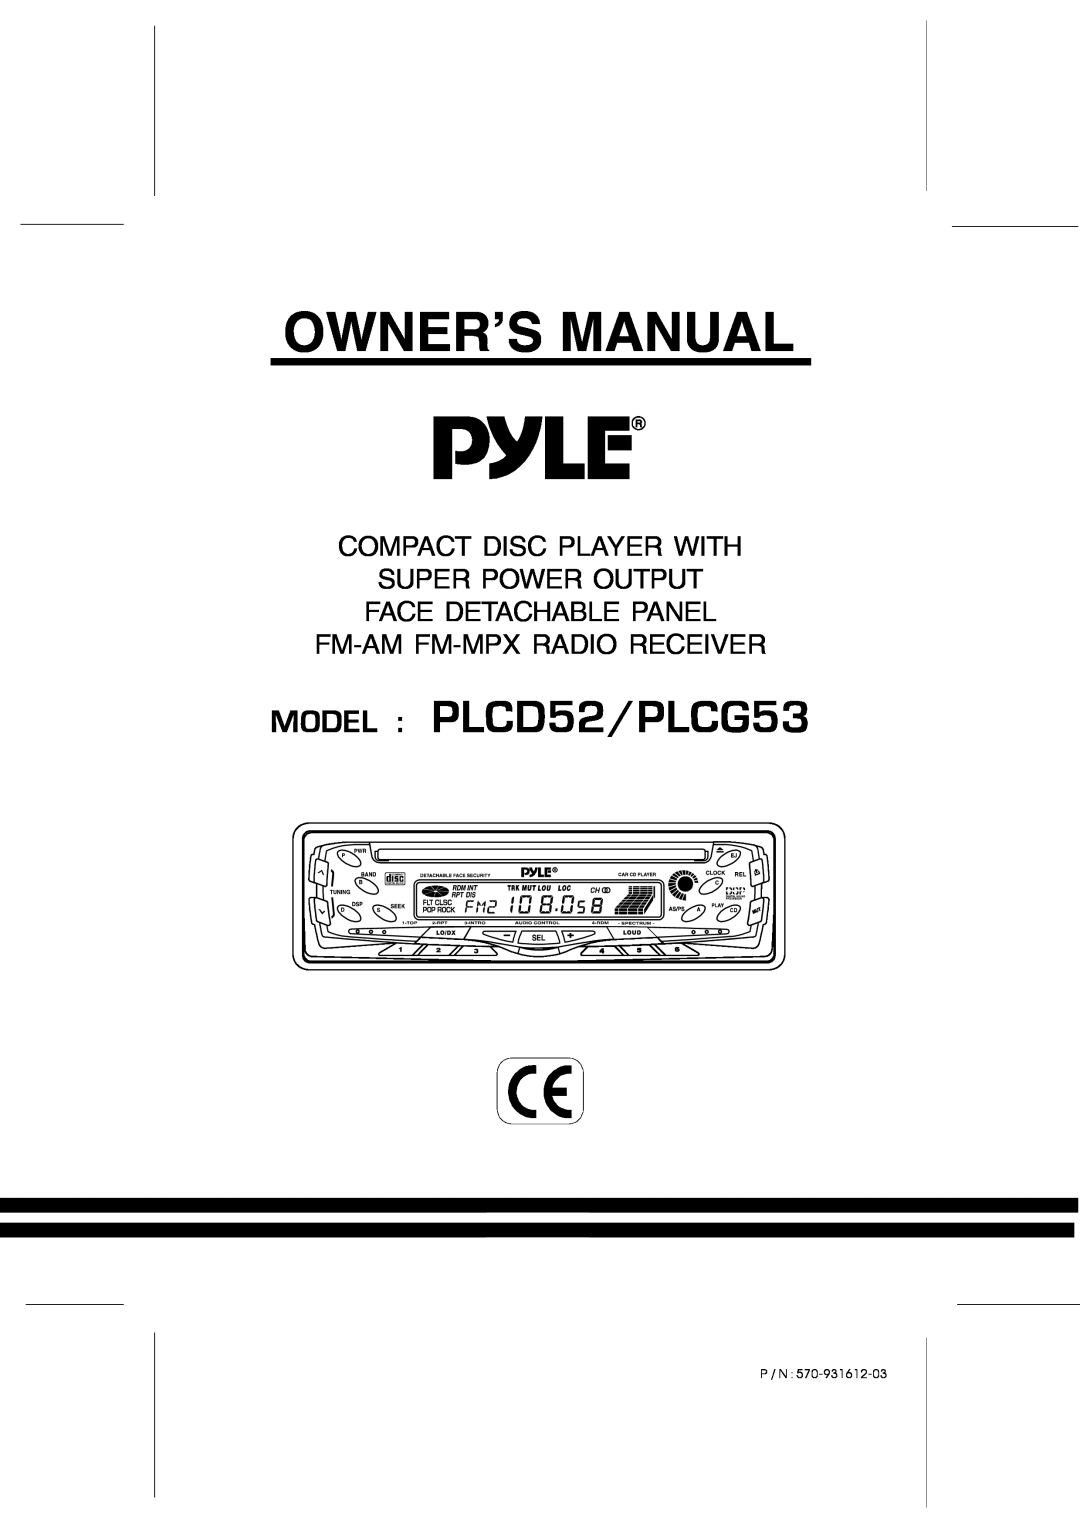 PYLE Audio owner manual MODEL PLCD52/PLCG53, Compact Disc Player With Super Power Output, P / N 